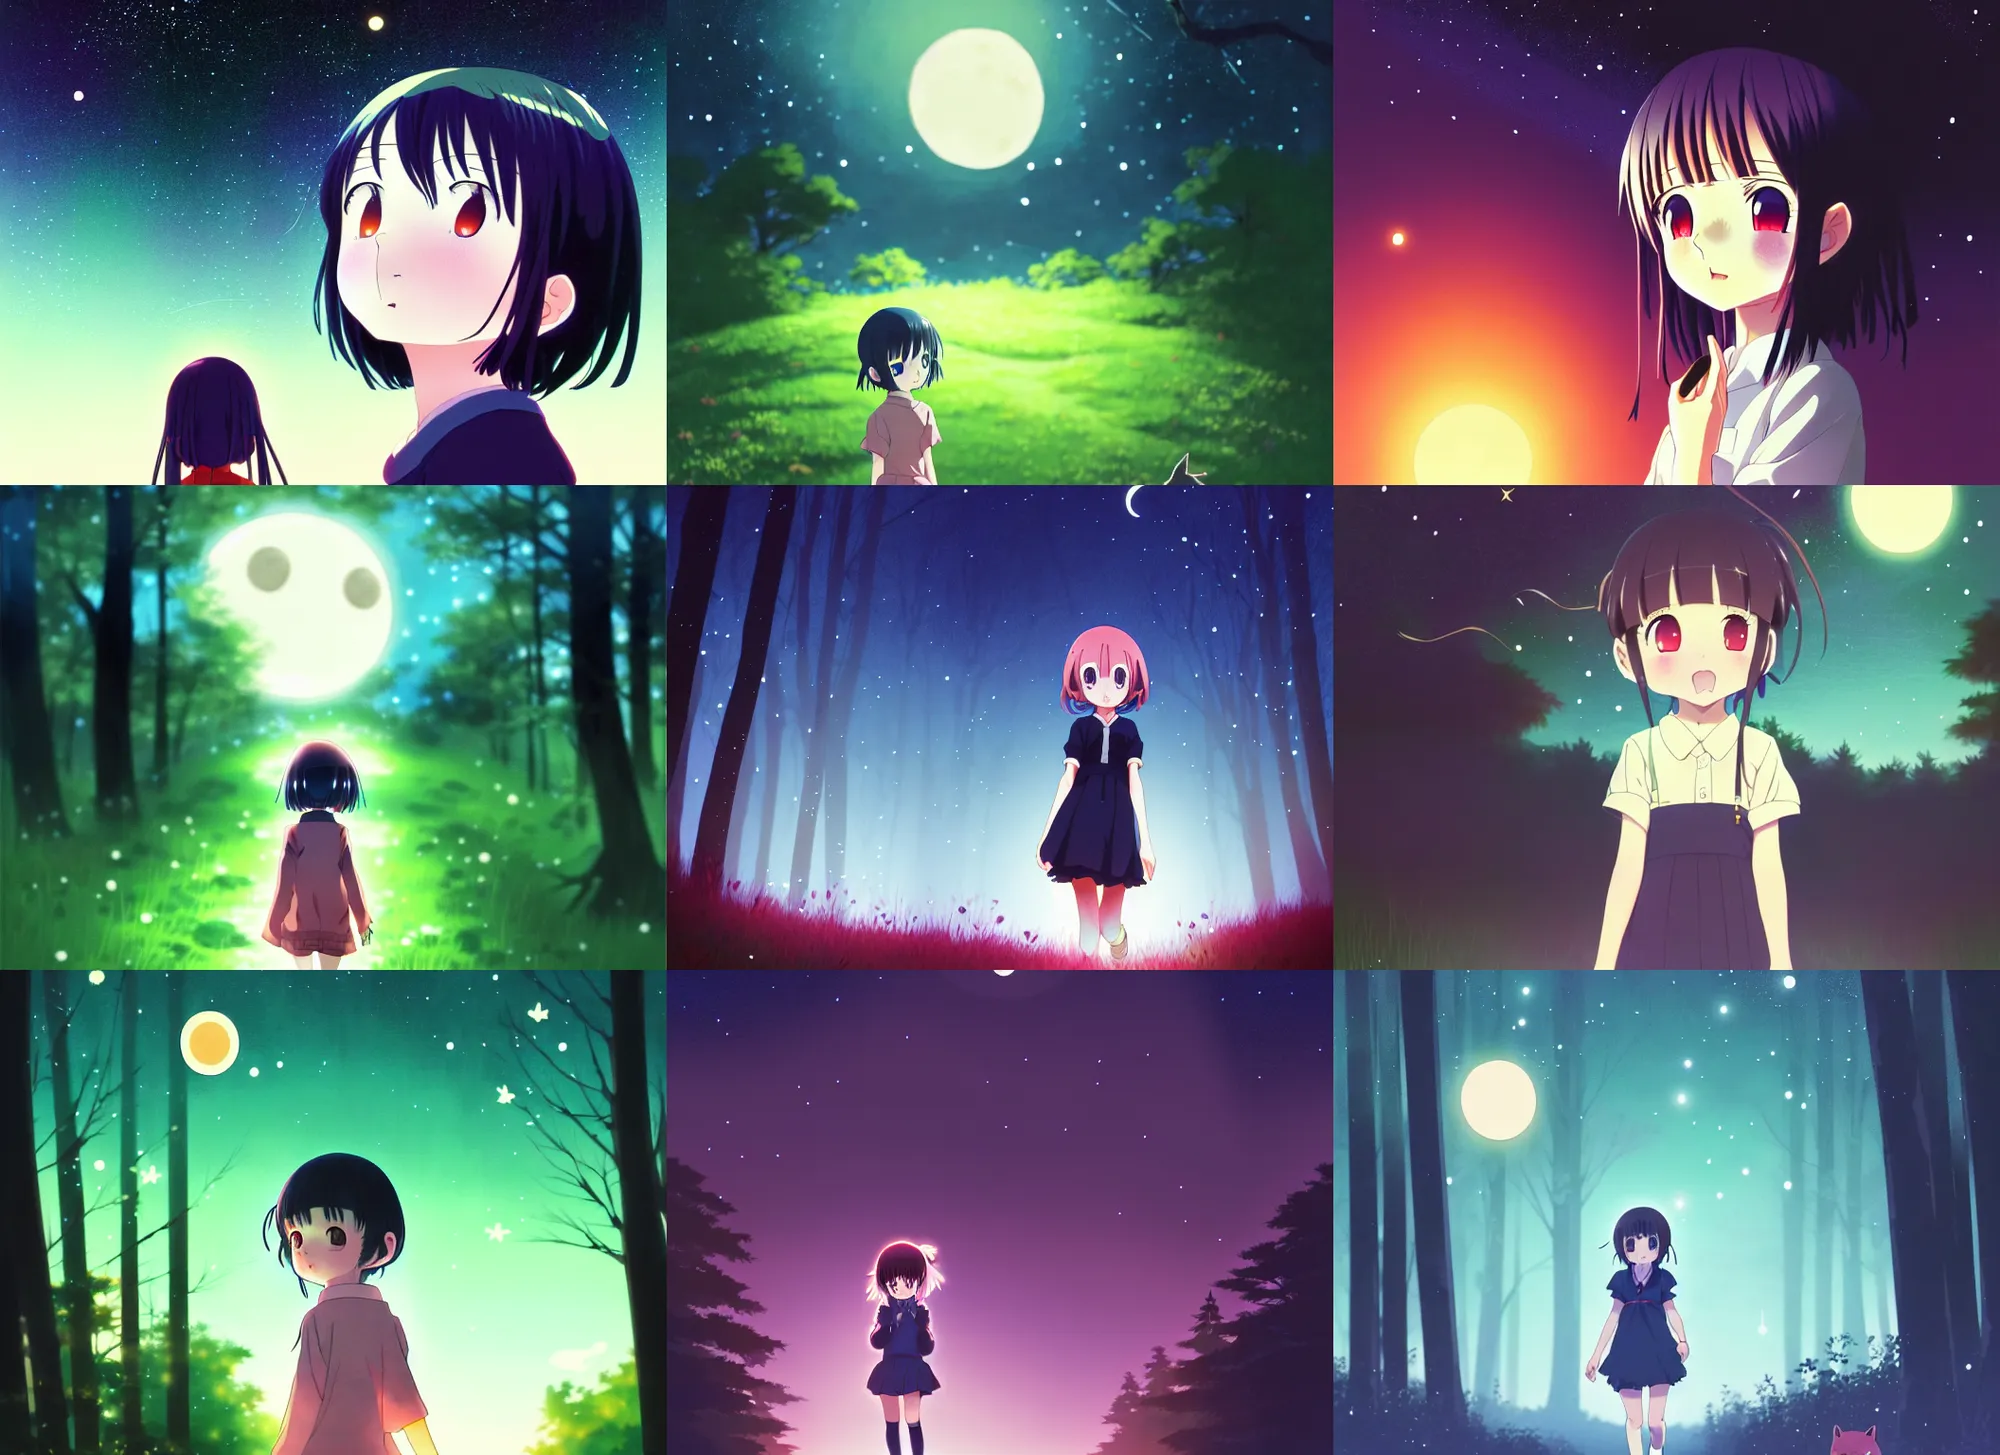 Prompt: anime visual, portrait of a curious young girl walking in a forest at night, night sky, very dark, moon, cute face by ilya kuvshinov, yoh yoshinari, dynamic pose, dynamic perspective, rounded eyes, kyoani, natsume yuujinchou, smooth facial features, mamoru hosoda